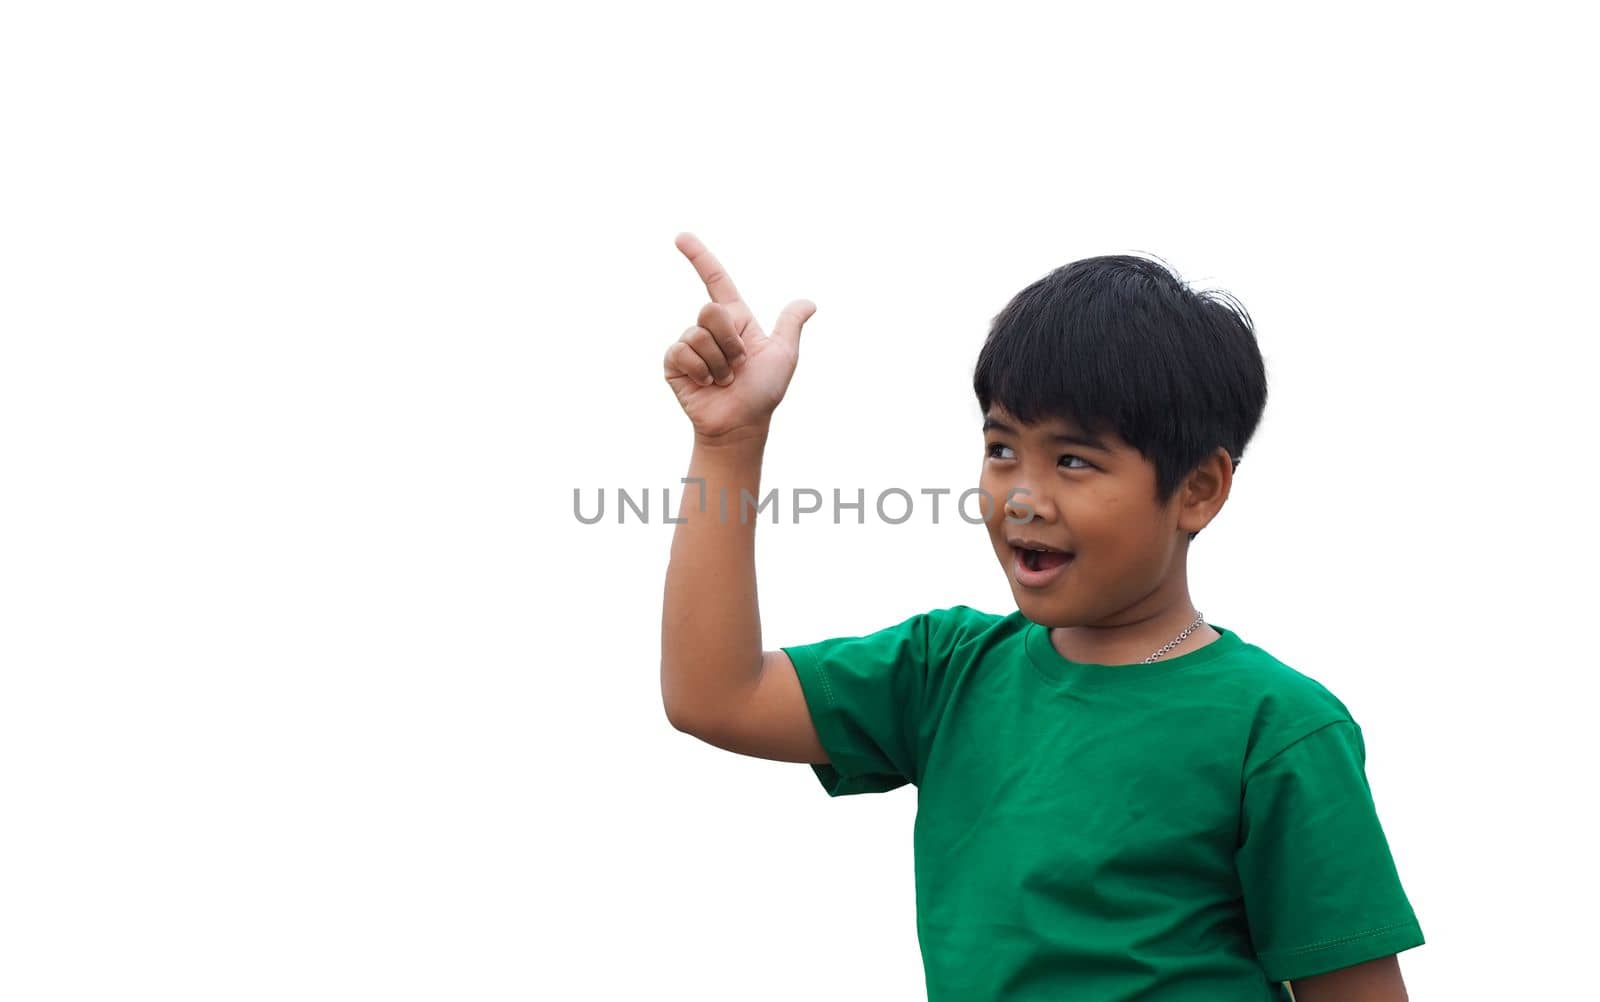 The boy smiled and pointed his hand to his side. on a white background by Unimages2527